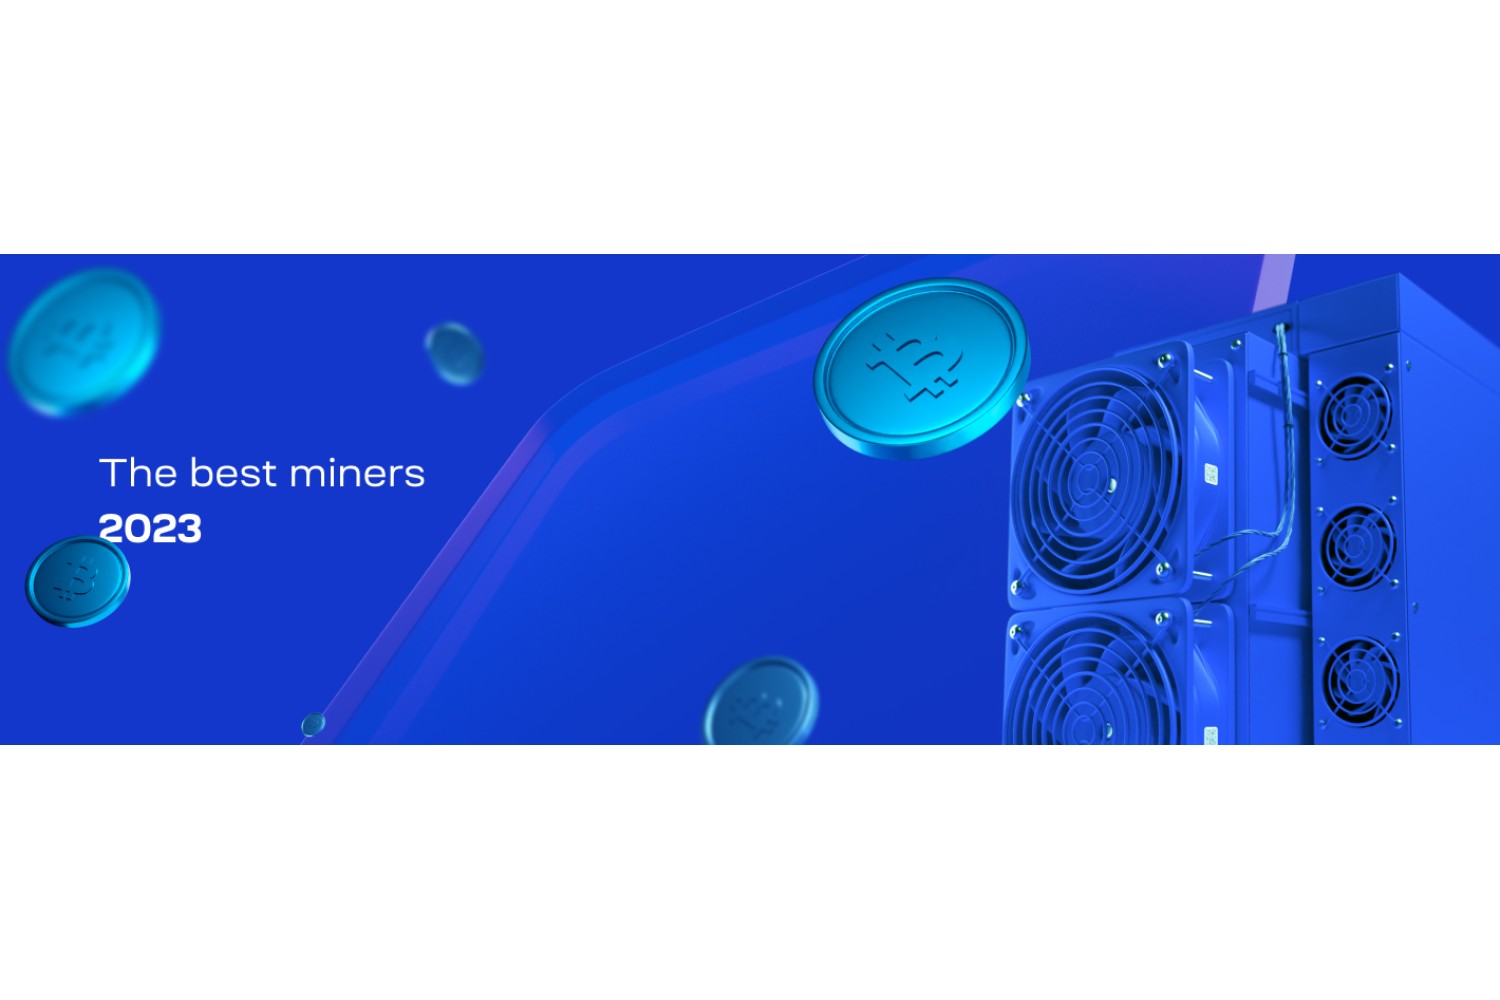 The best miners for 2023!